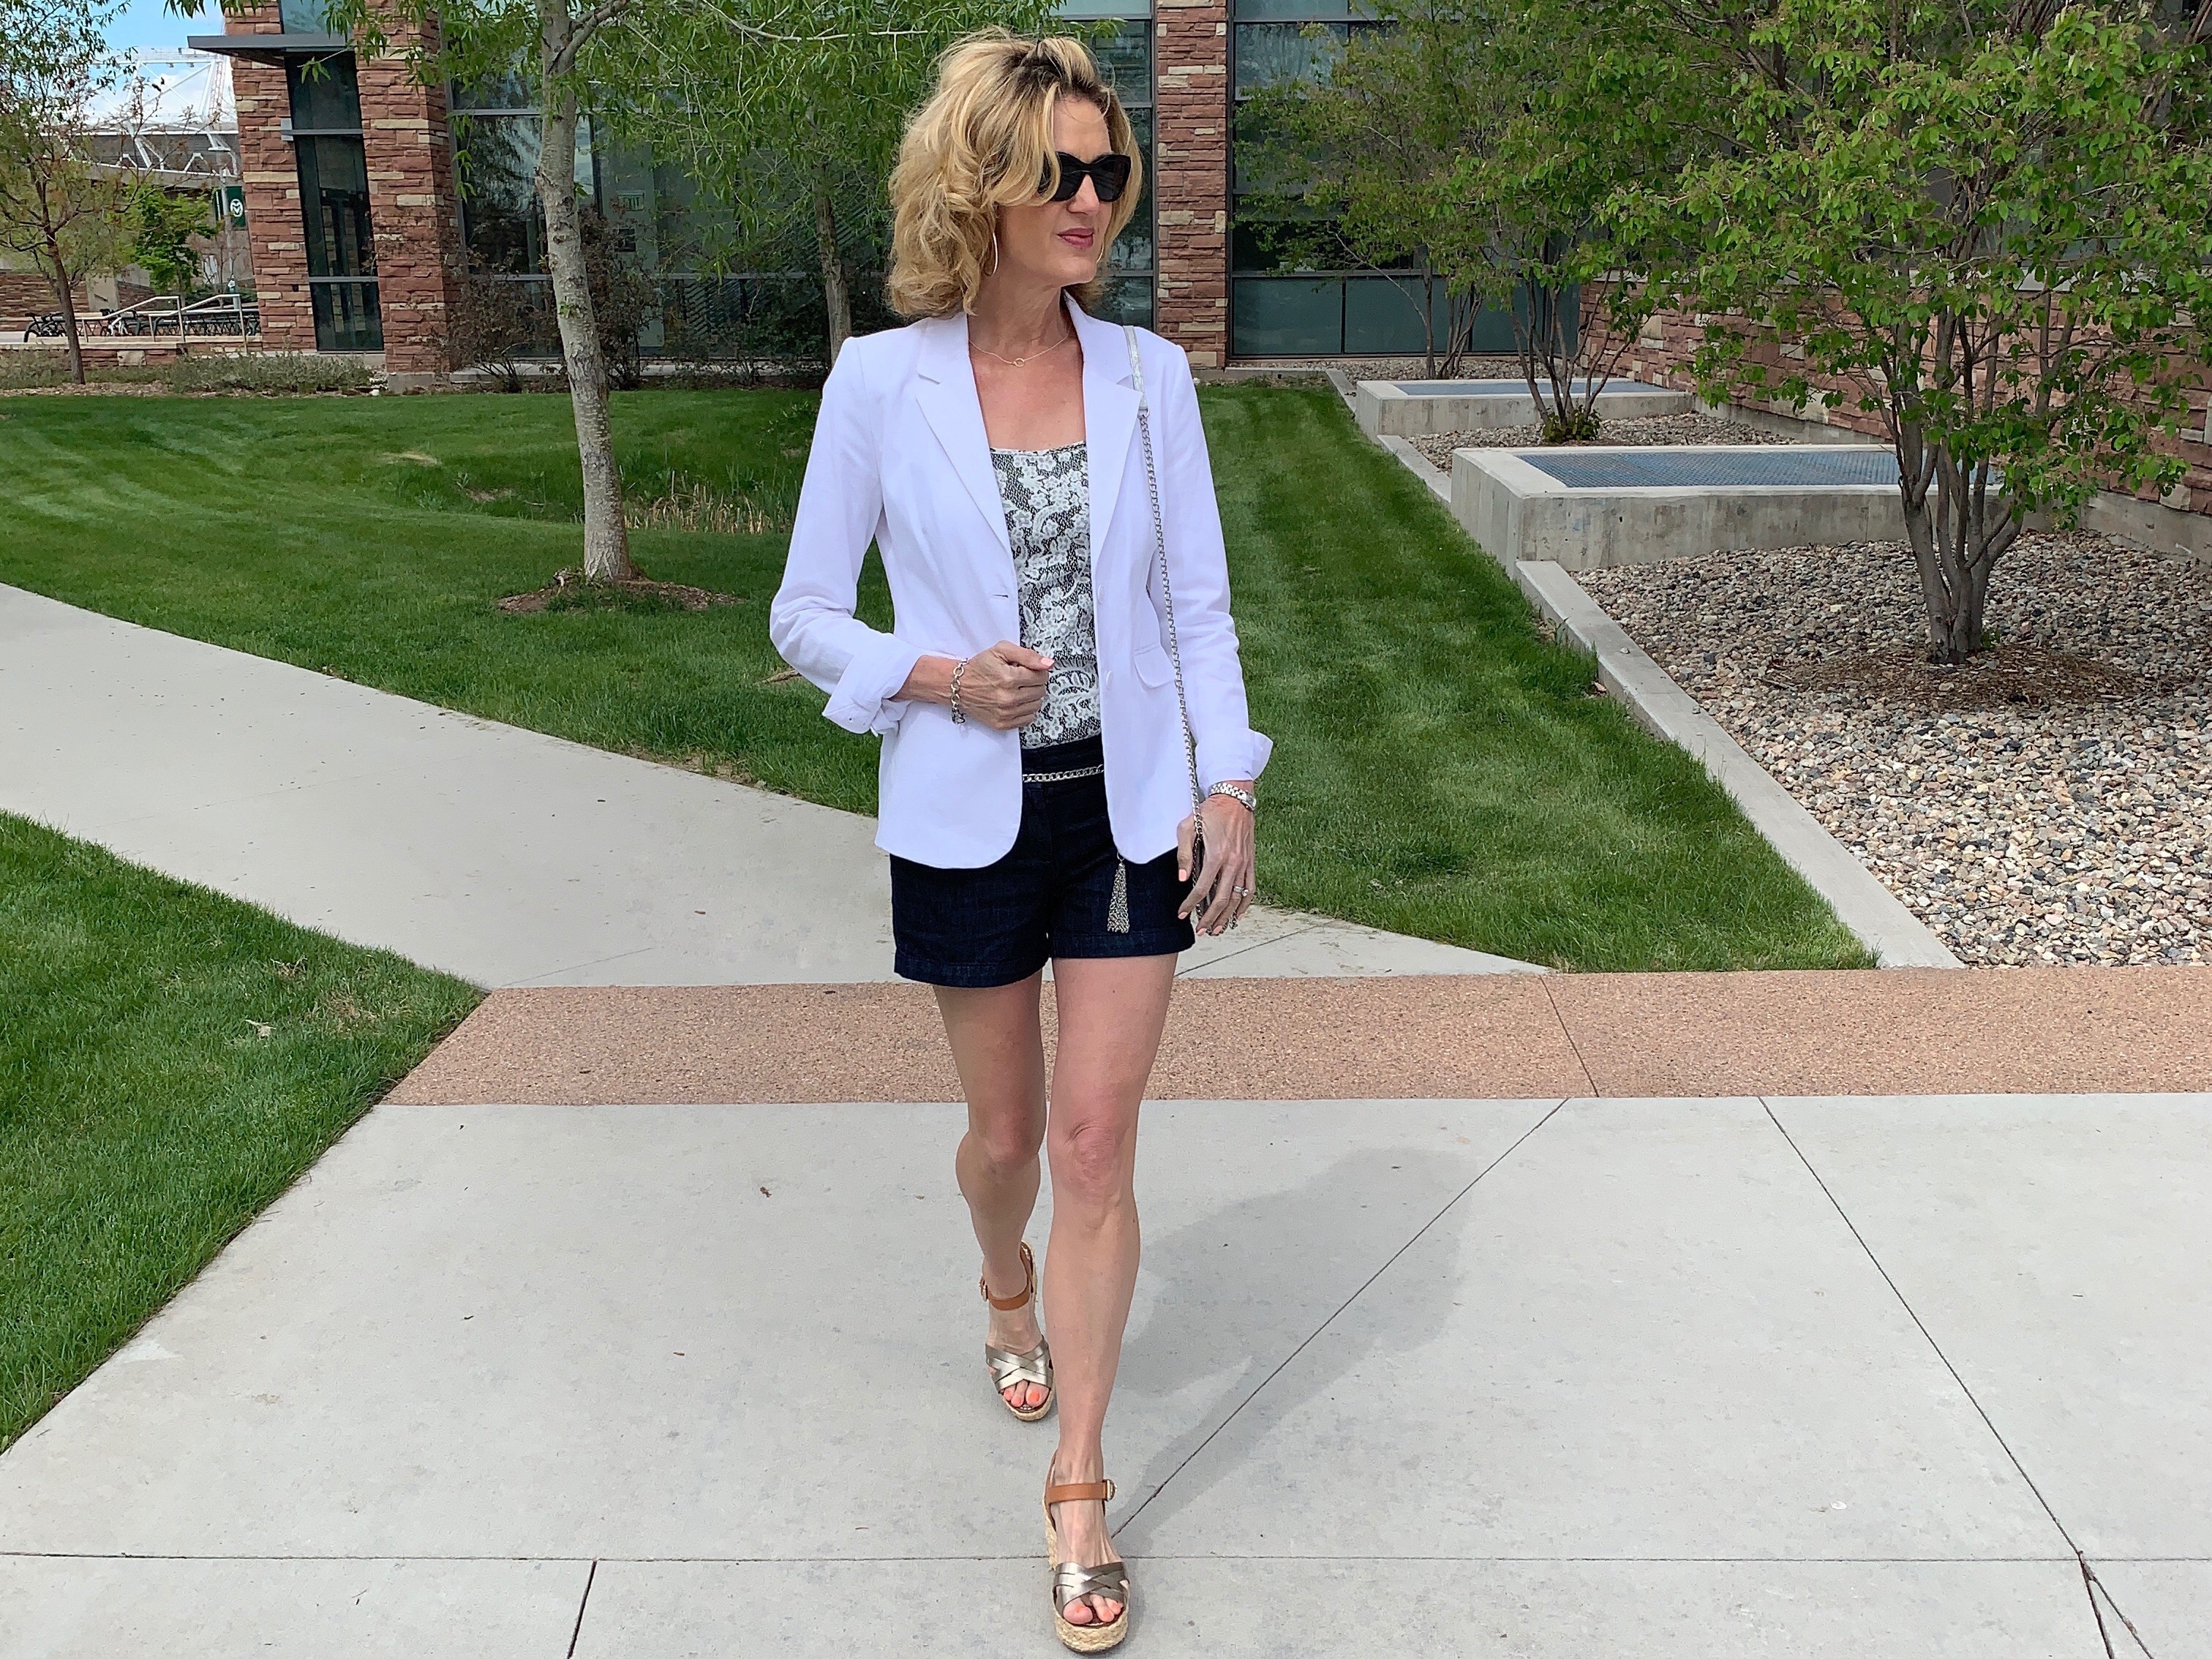 4 ways to style a white blazer by Lisa at Midlifeinbloom.com